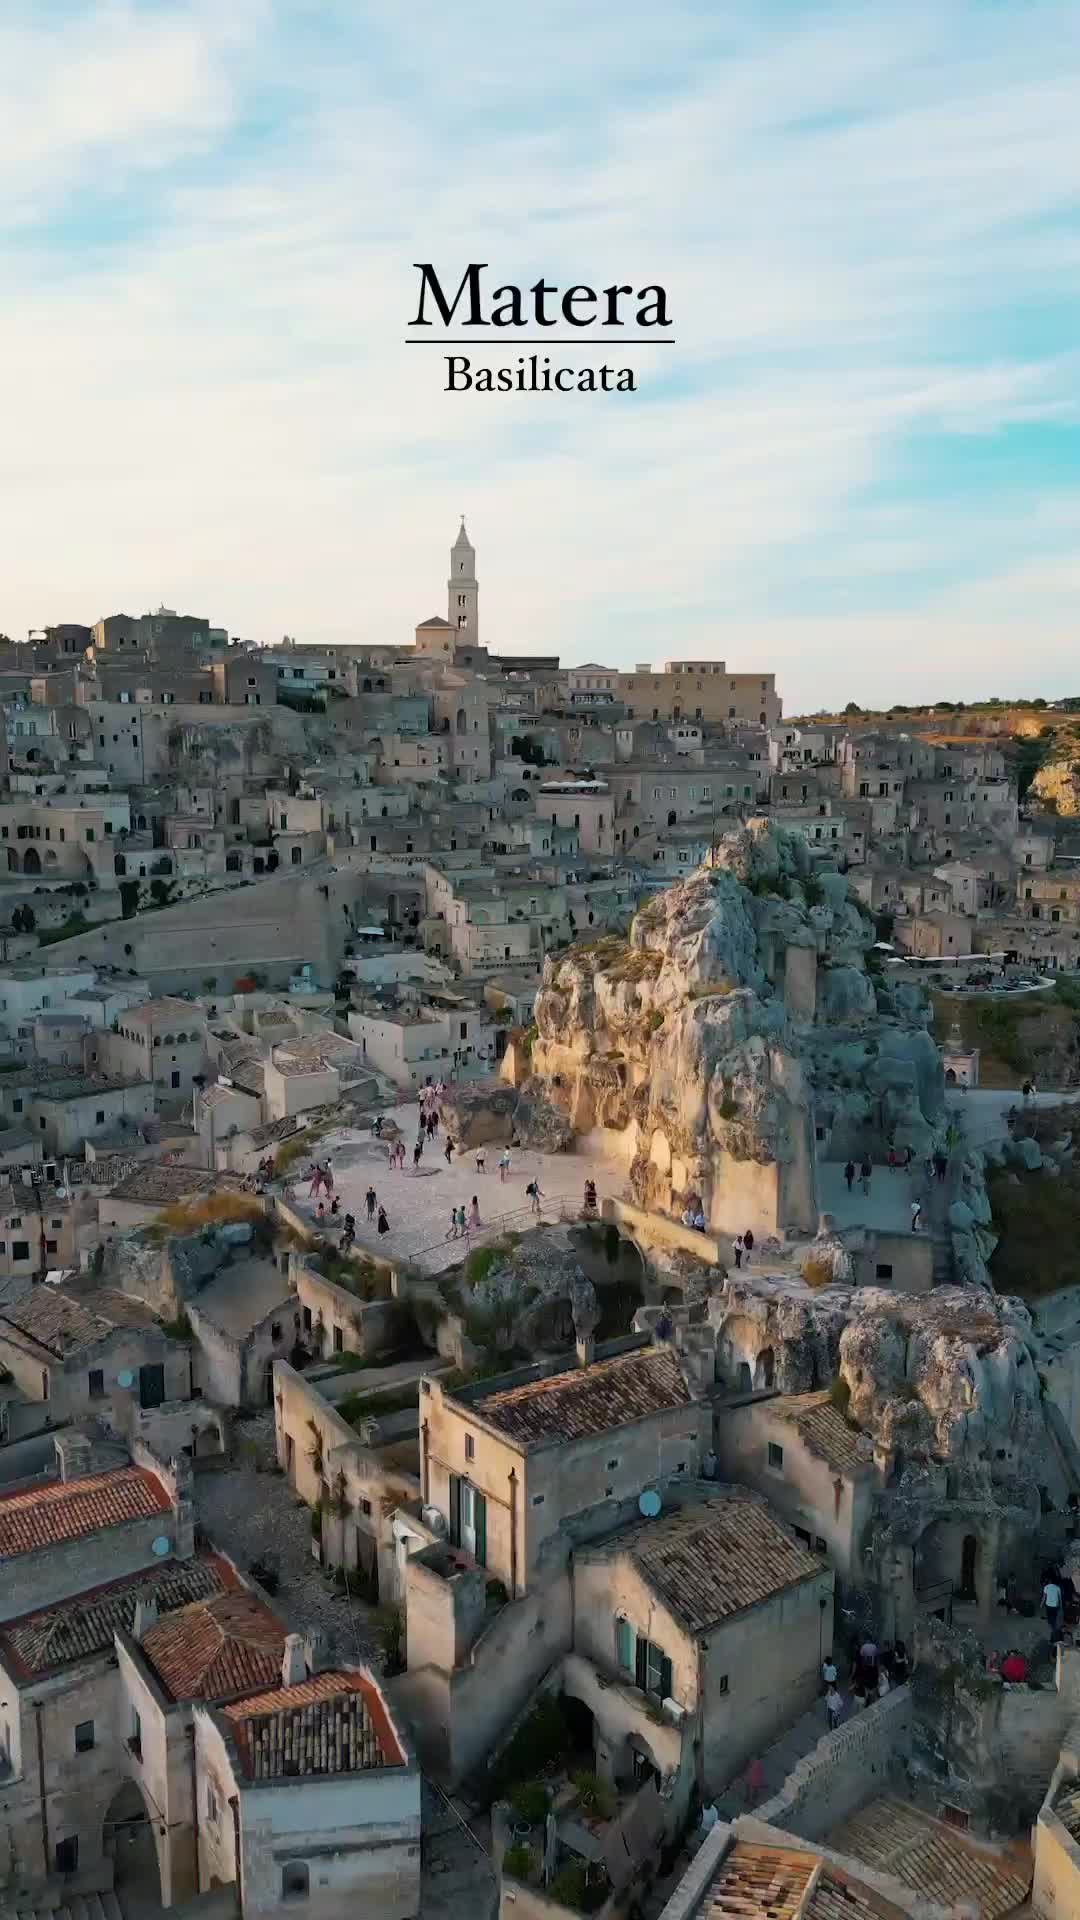 Explore Ancient Cave Dwellings in Matera, Italy